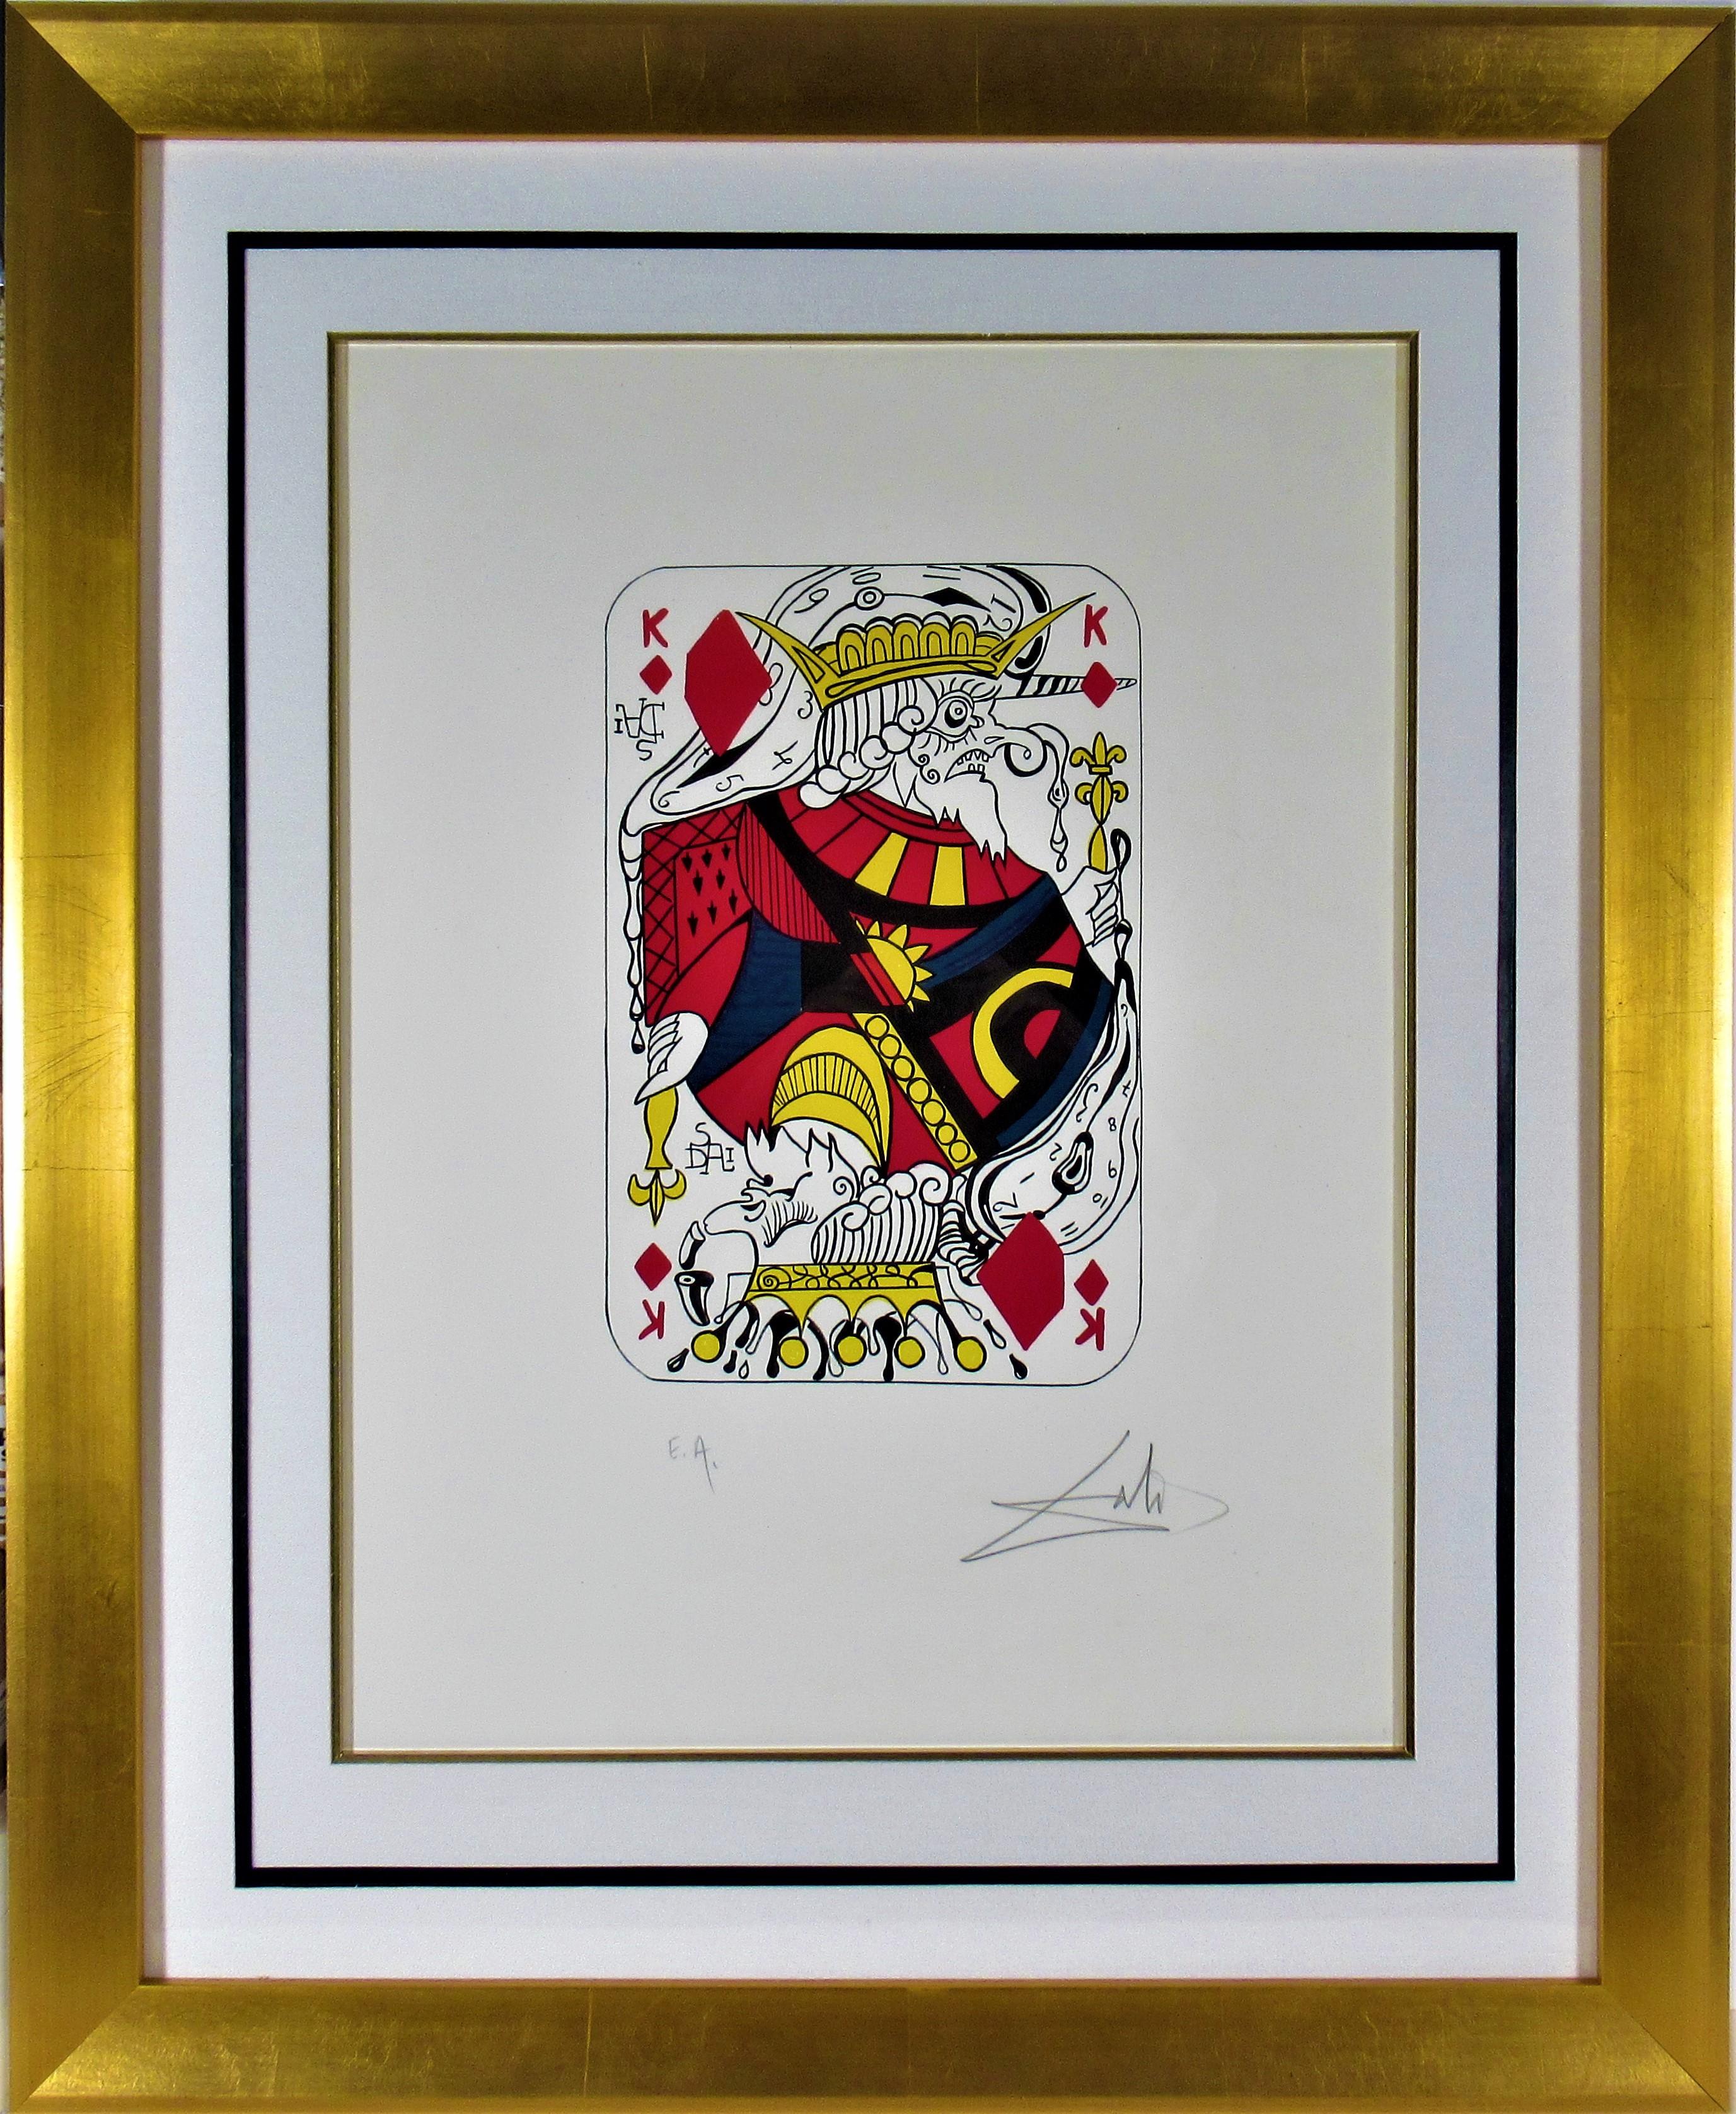 Salvador Dalí Figurative Print - "King of Diamonds" from the suite "Playing Cards"